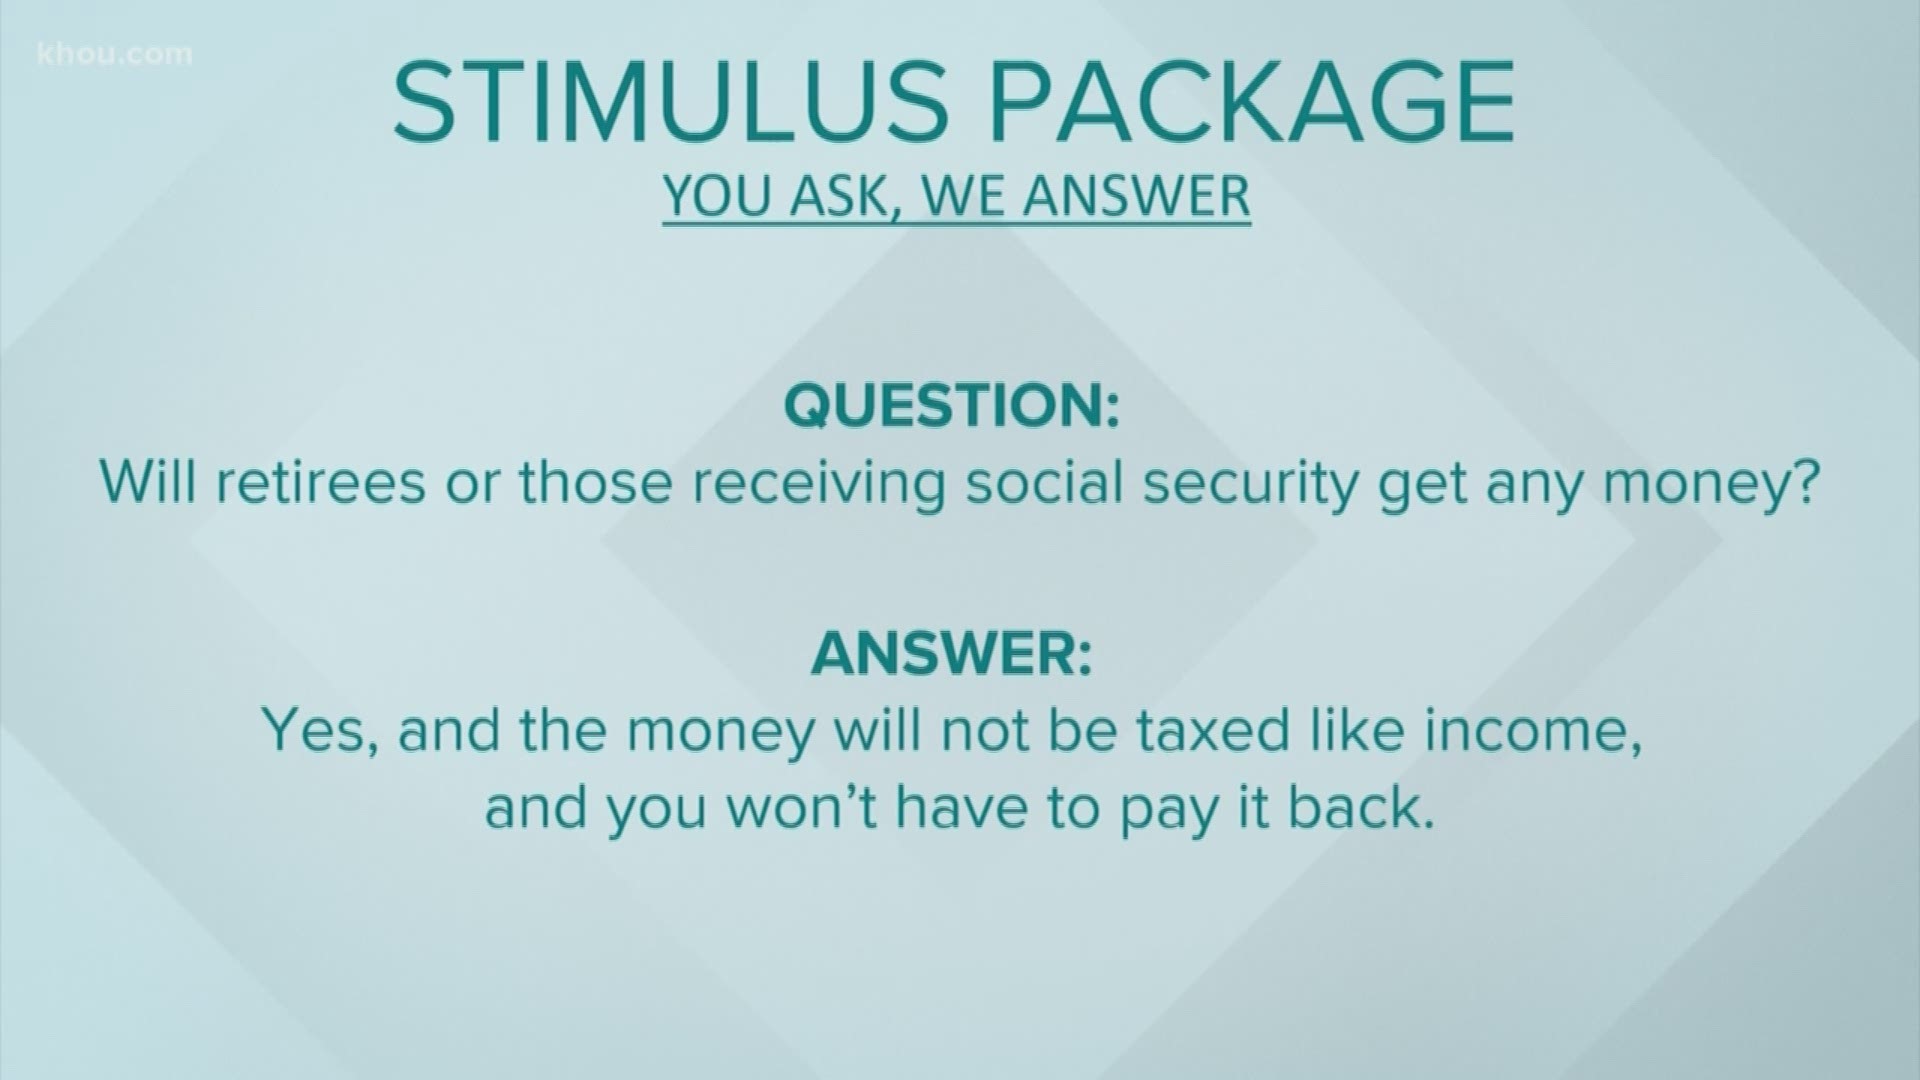 We are answering KHOU 11 viewers' questions about the coronavirus stimulus package, including how you'll receive the money and how much you're expected to get.